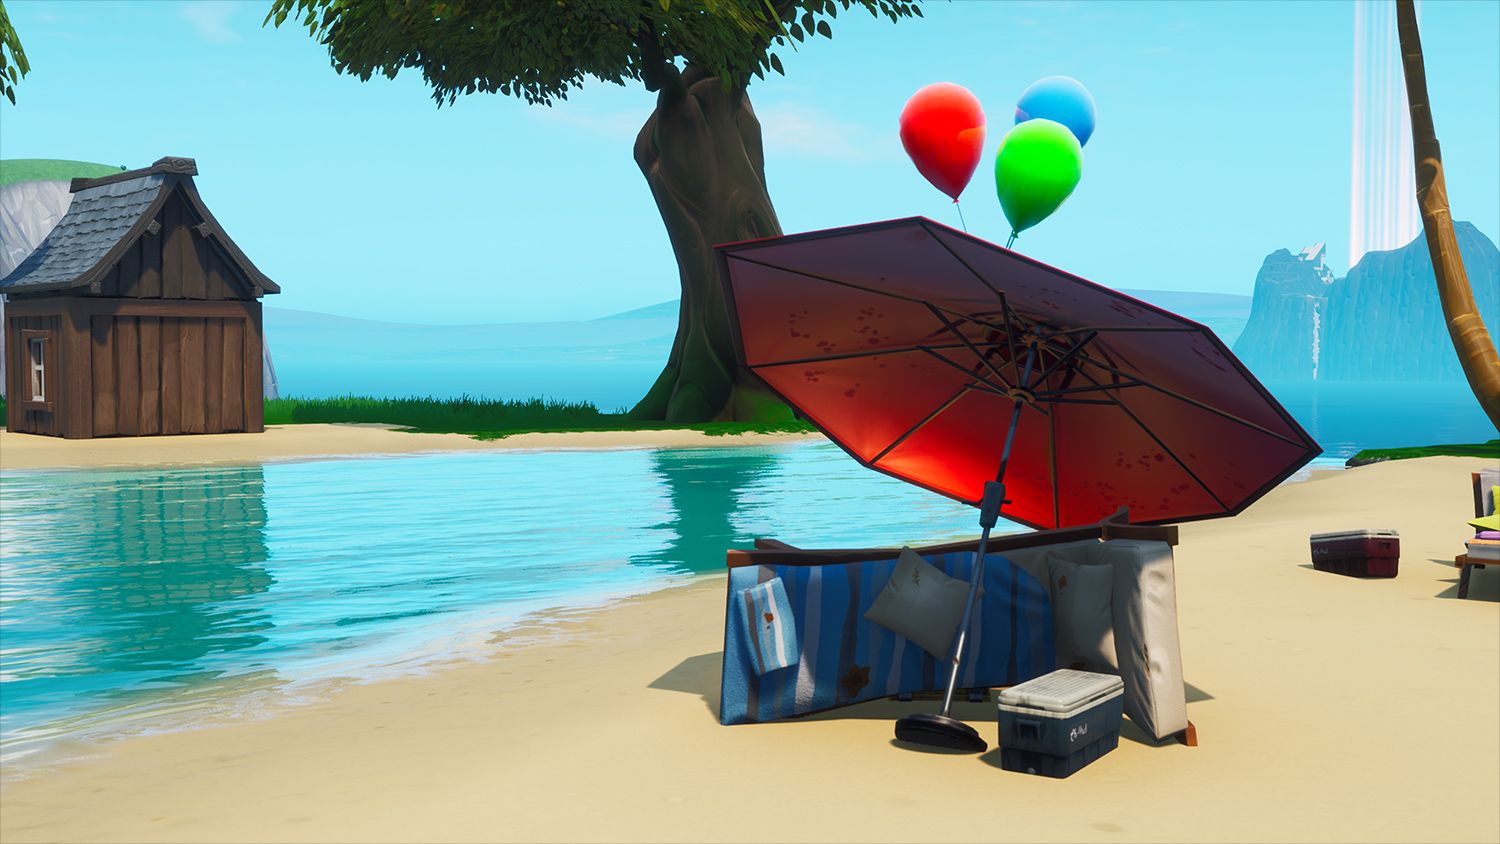 Fortnite 14 Days of Summer - Pop party balloon decorations location guide